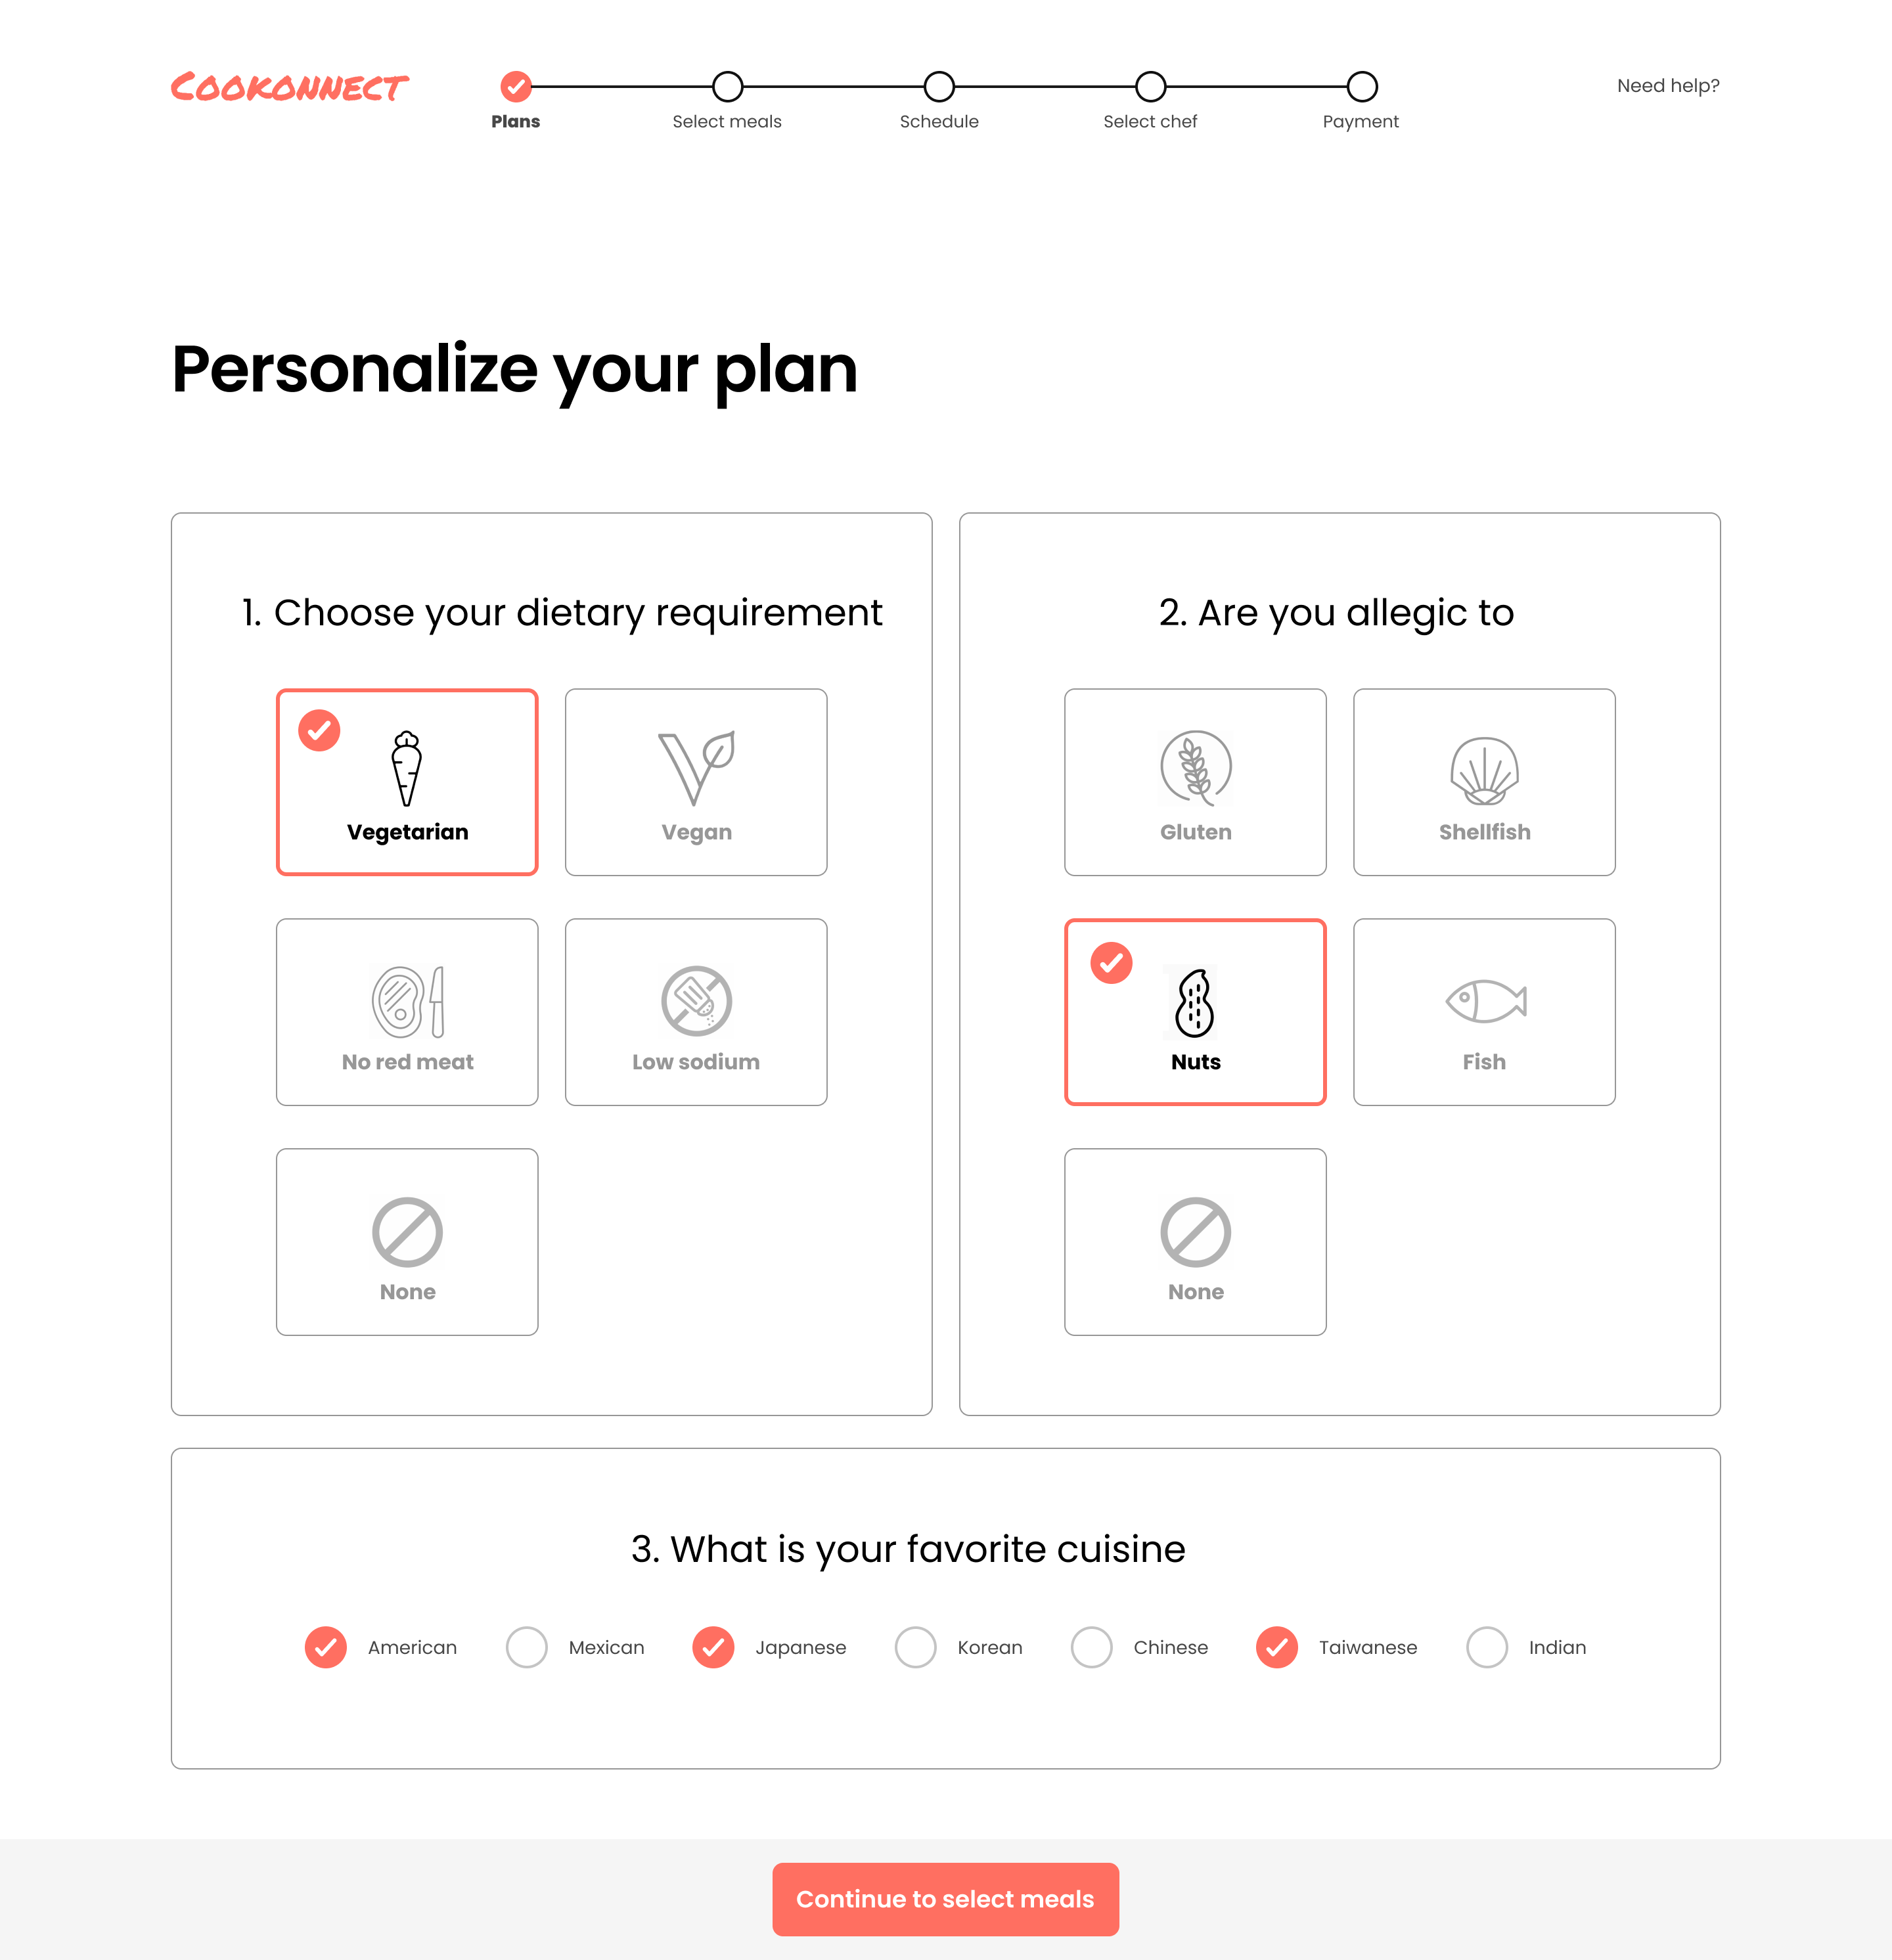 On boarding - Personalize your plan